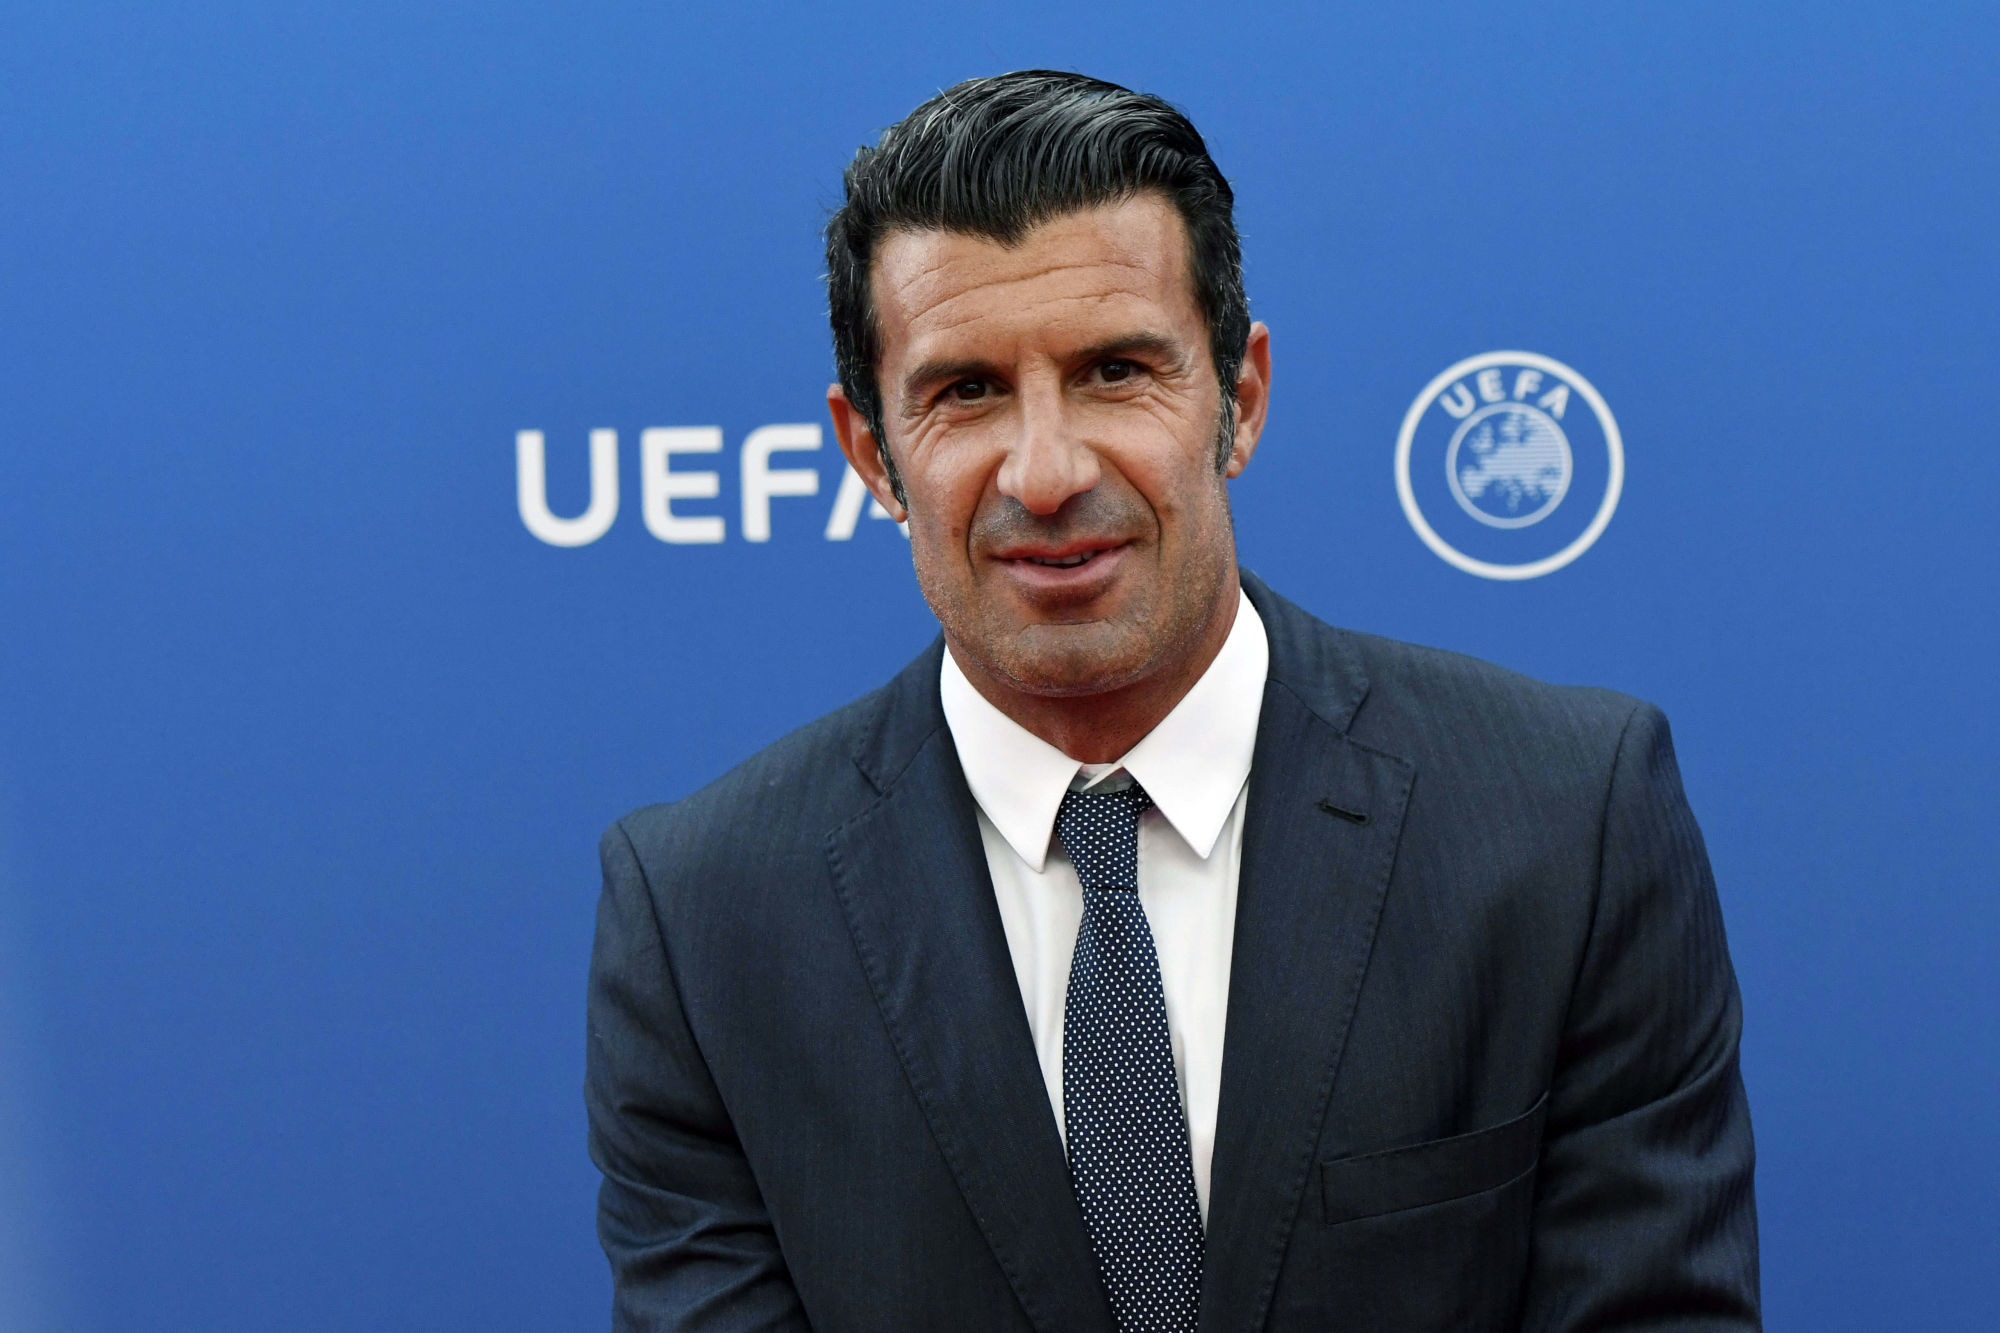 Focus on Luis Figo, the first Galactici and Ballon d’Or in the 2000s – Foot11.com